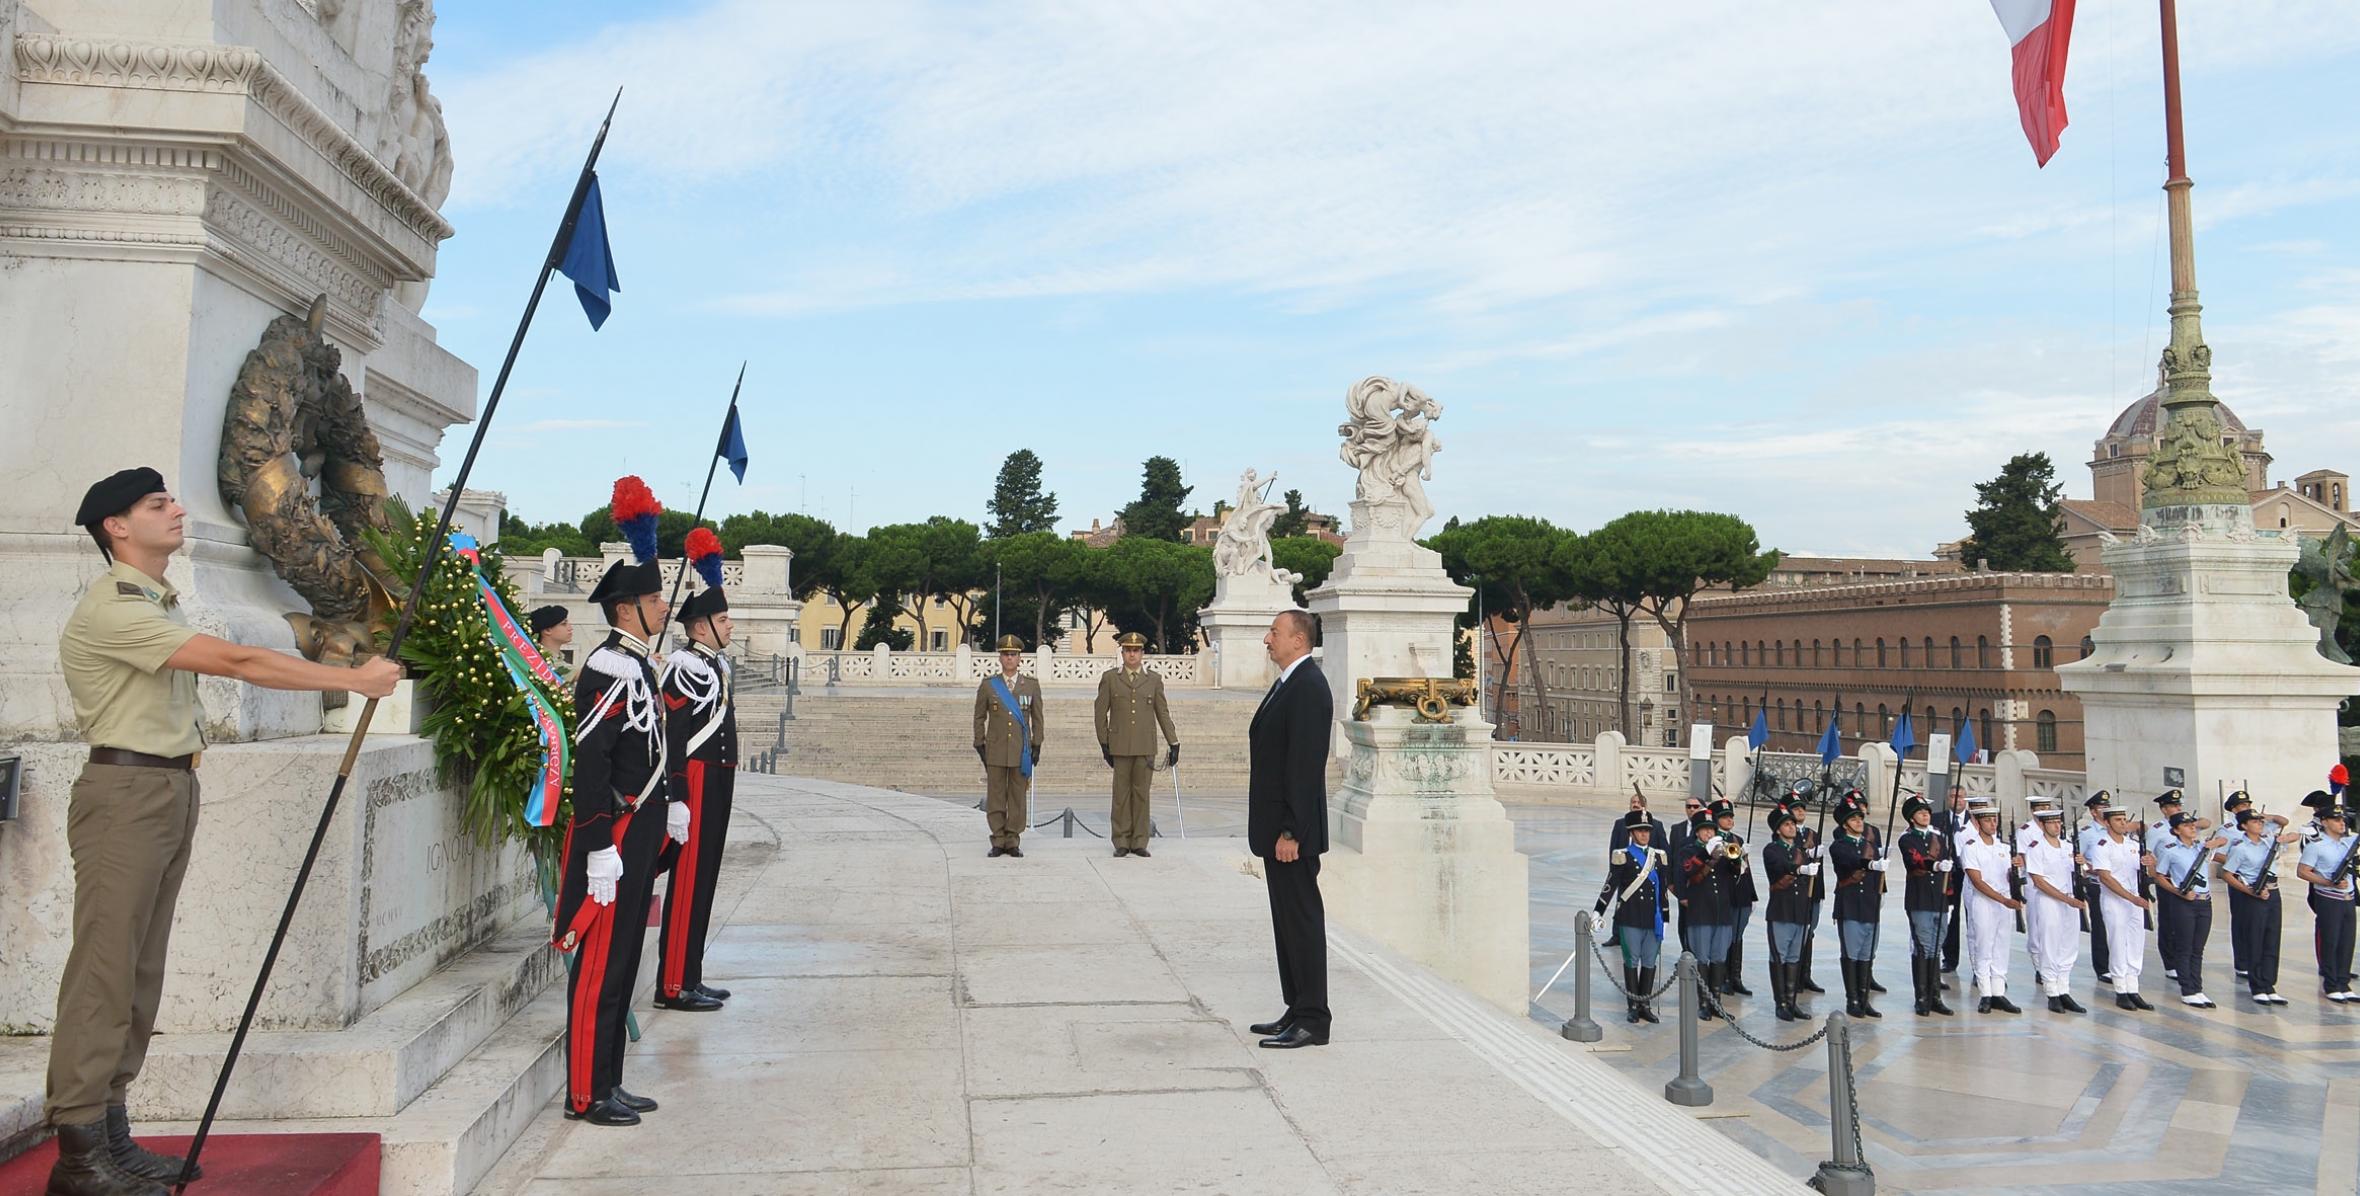 Ilham Aliyev visited the Tomb of the Unknown Soldier in Rome